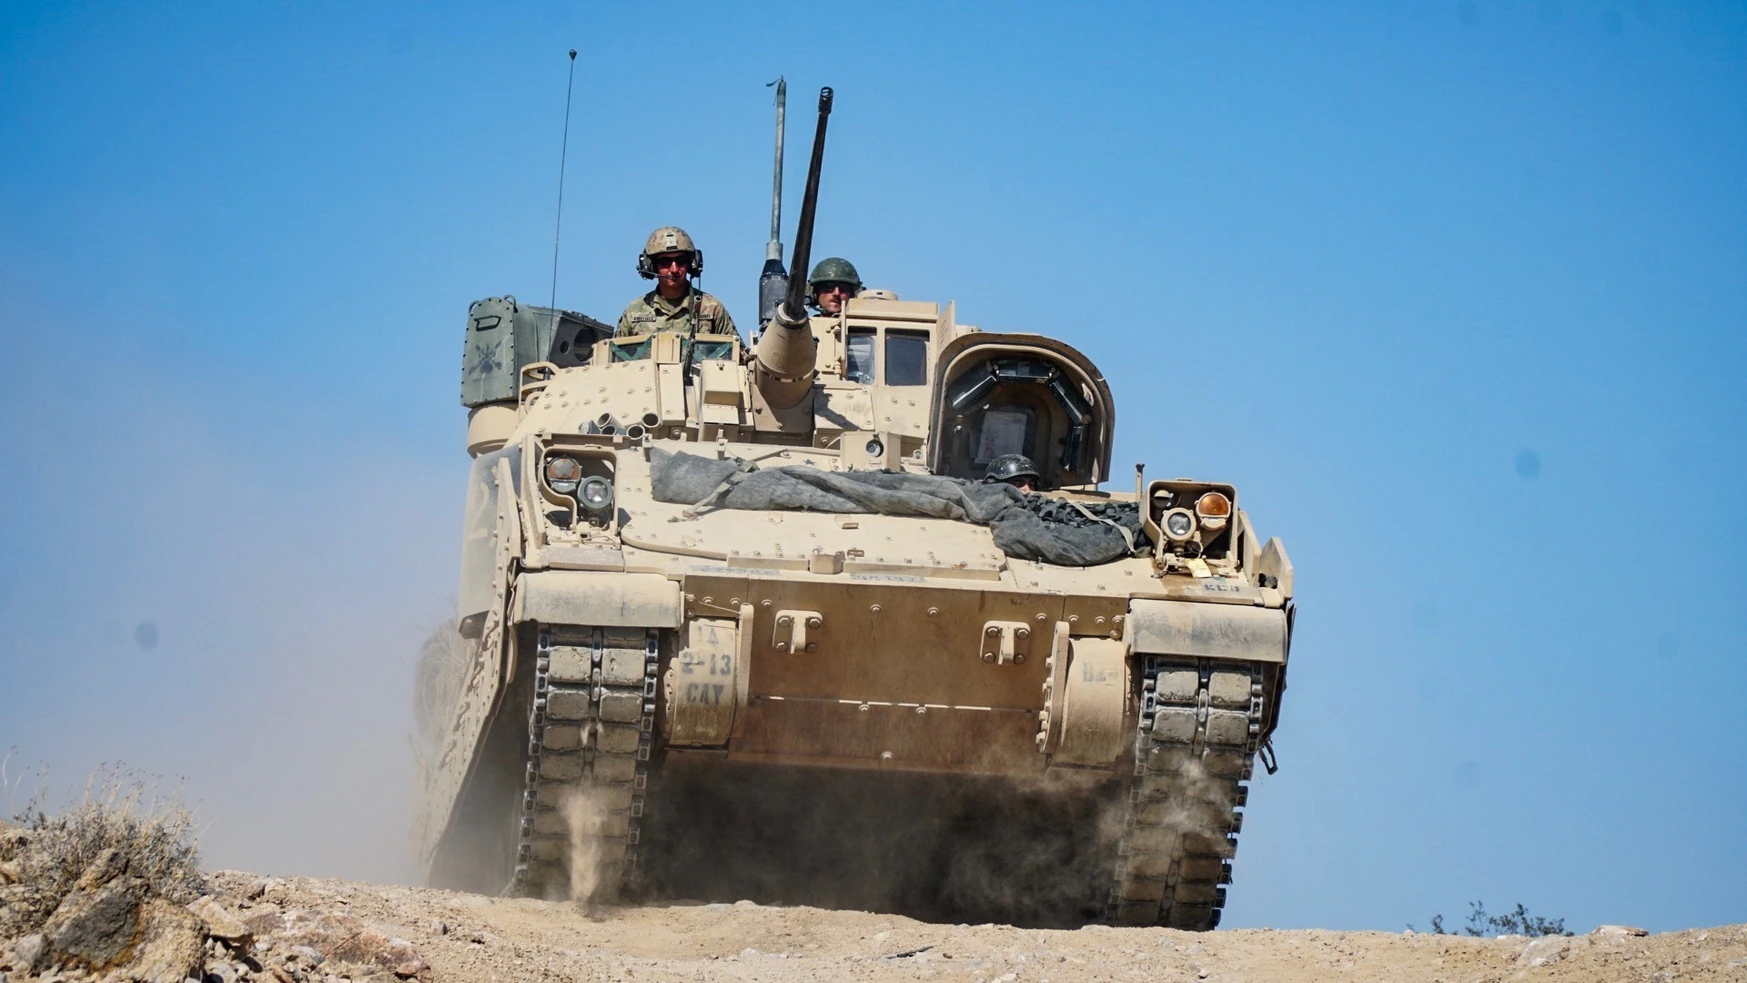 Soldiers assigned to 3rd Armored Brigade Combat Team, 1st Armored Division maneuver a Bradley Fighting Vehicle during training operations at the National Training Center in Fort Irwin, Calif., in 2018. (1st Lt. Sean Kealey/U.S. Army)